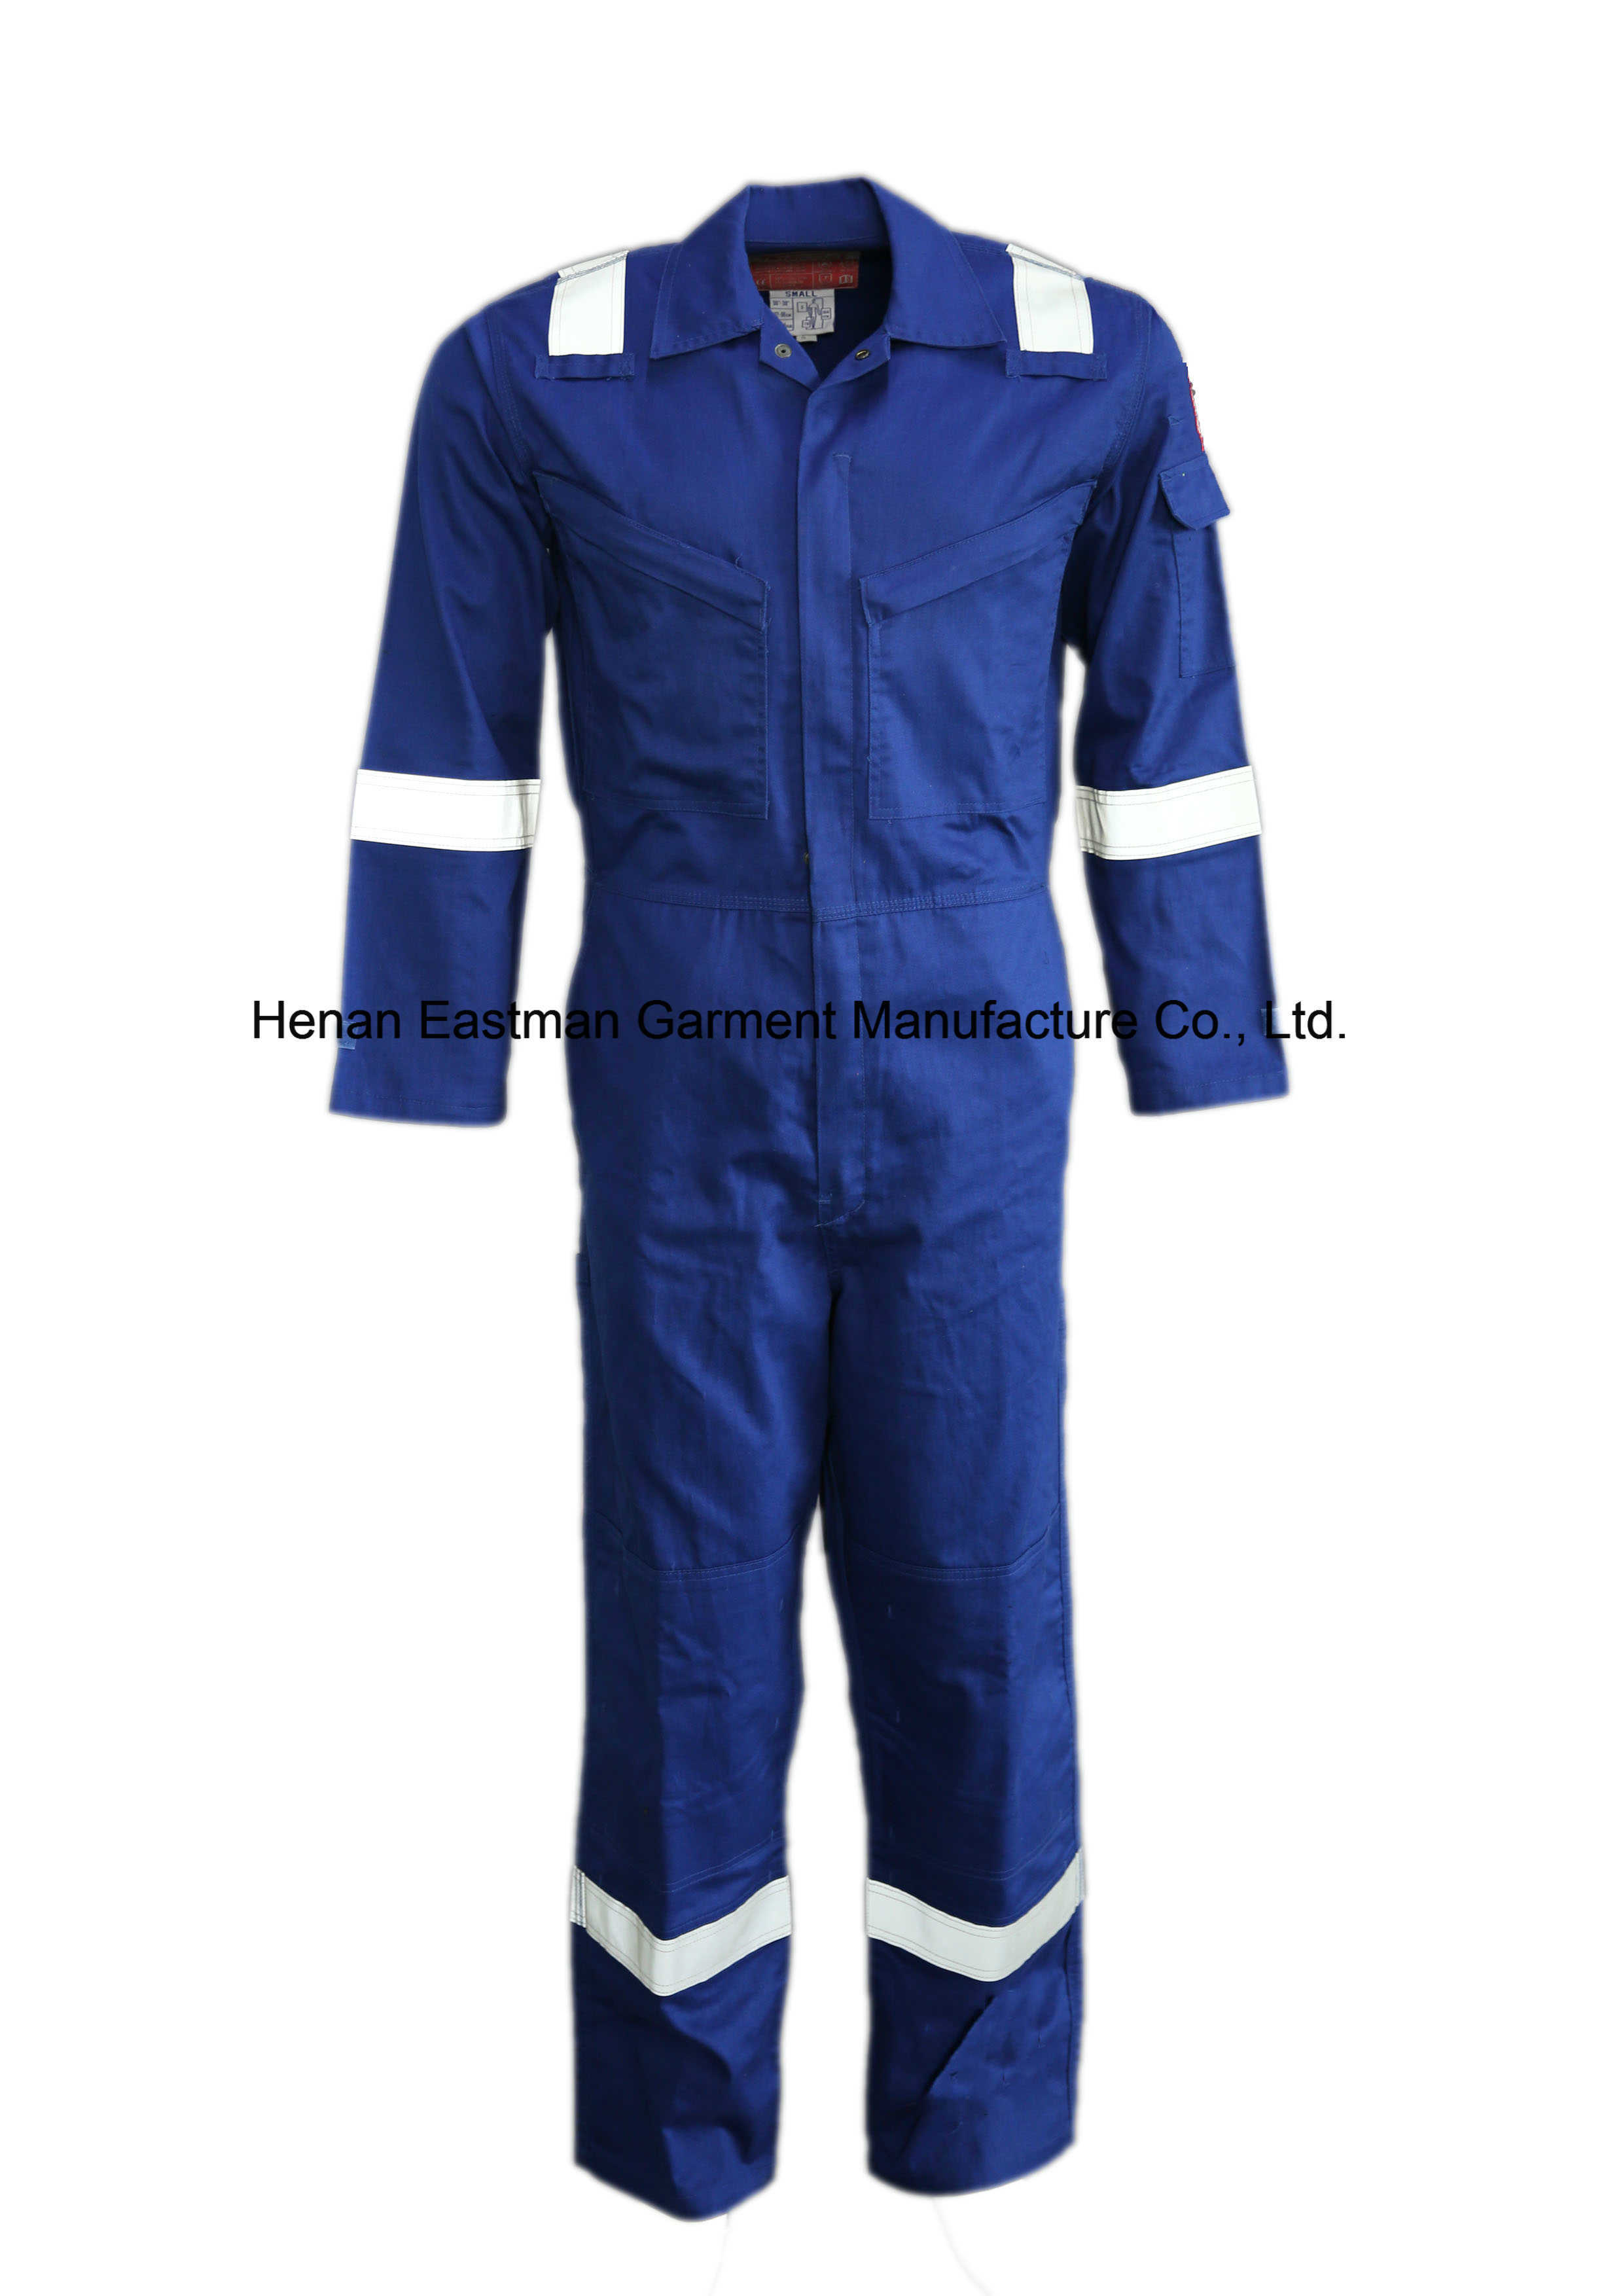 Nfpa2112/Can Cgsb 155.20 Standard Flame Resistant Coverall